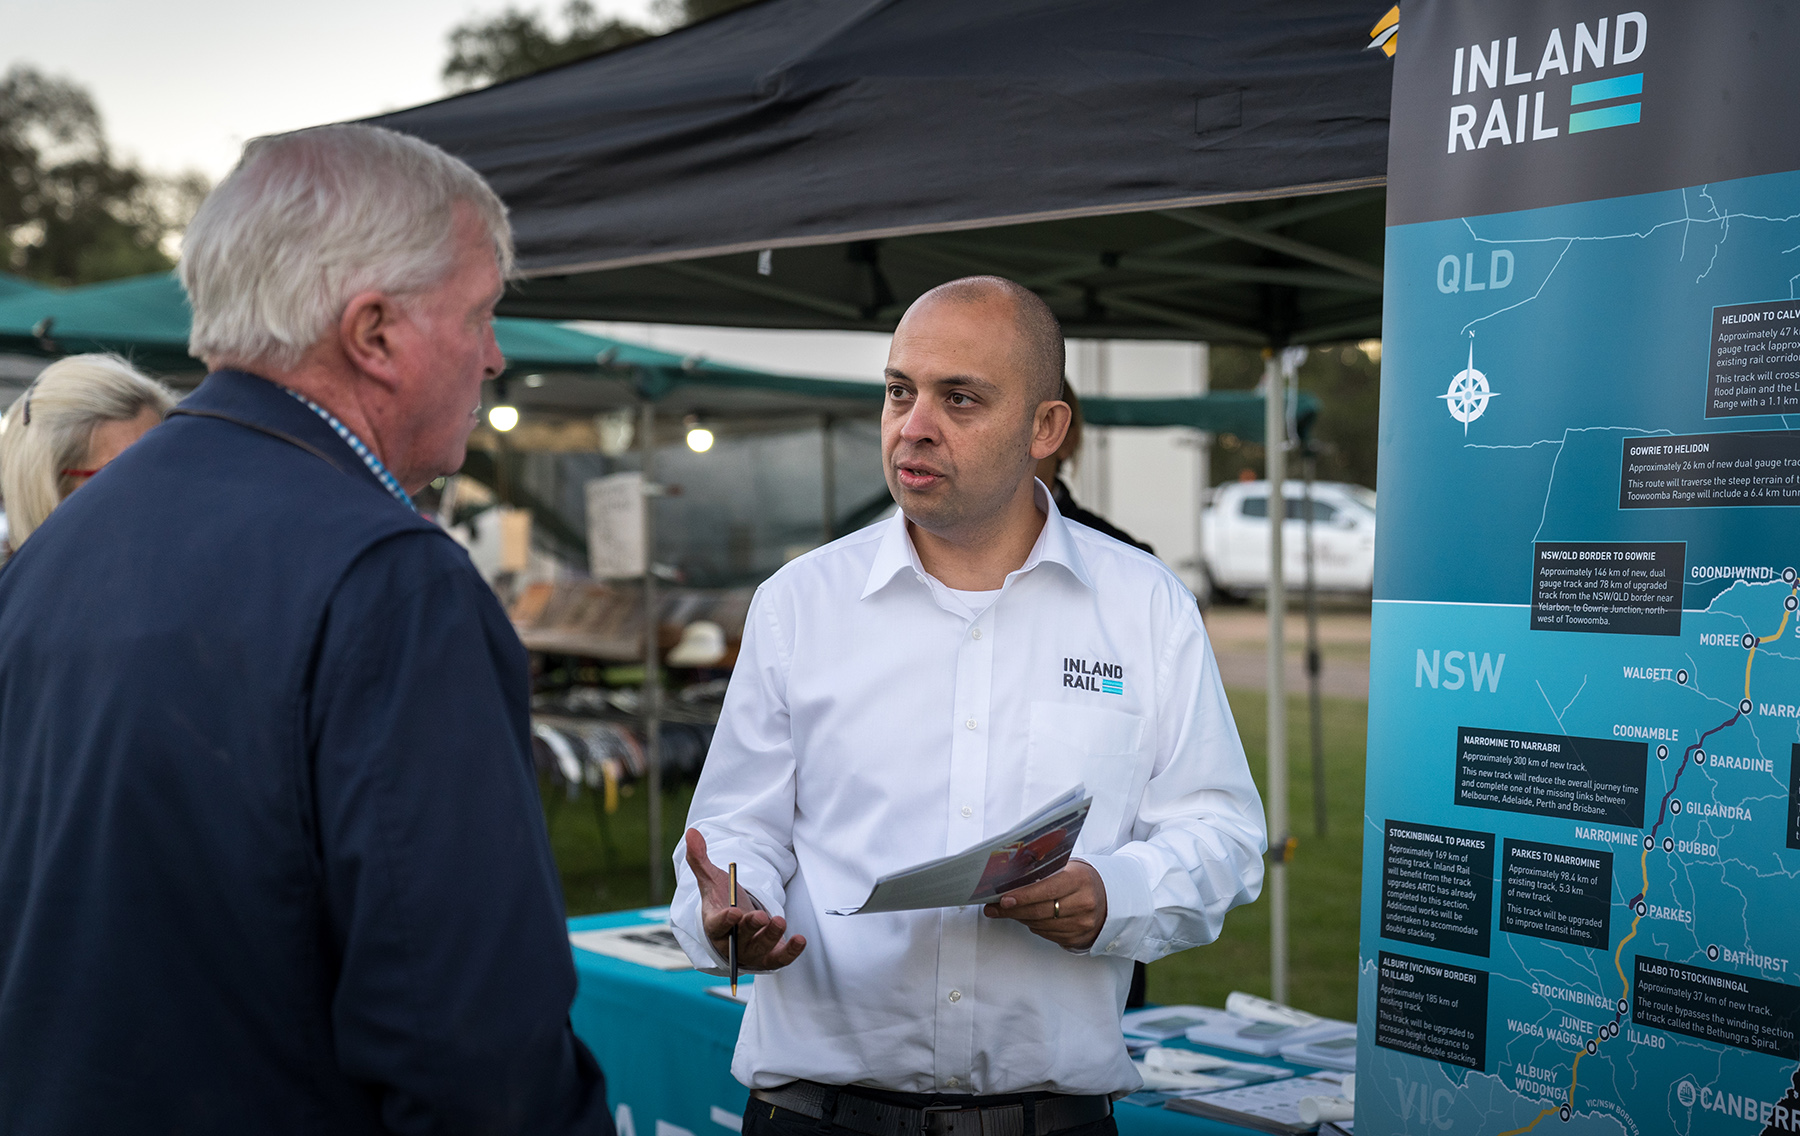 Stakeholder Engagement team member talking to community member at the 2019 Coonamble Show, New South Wales.